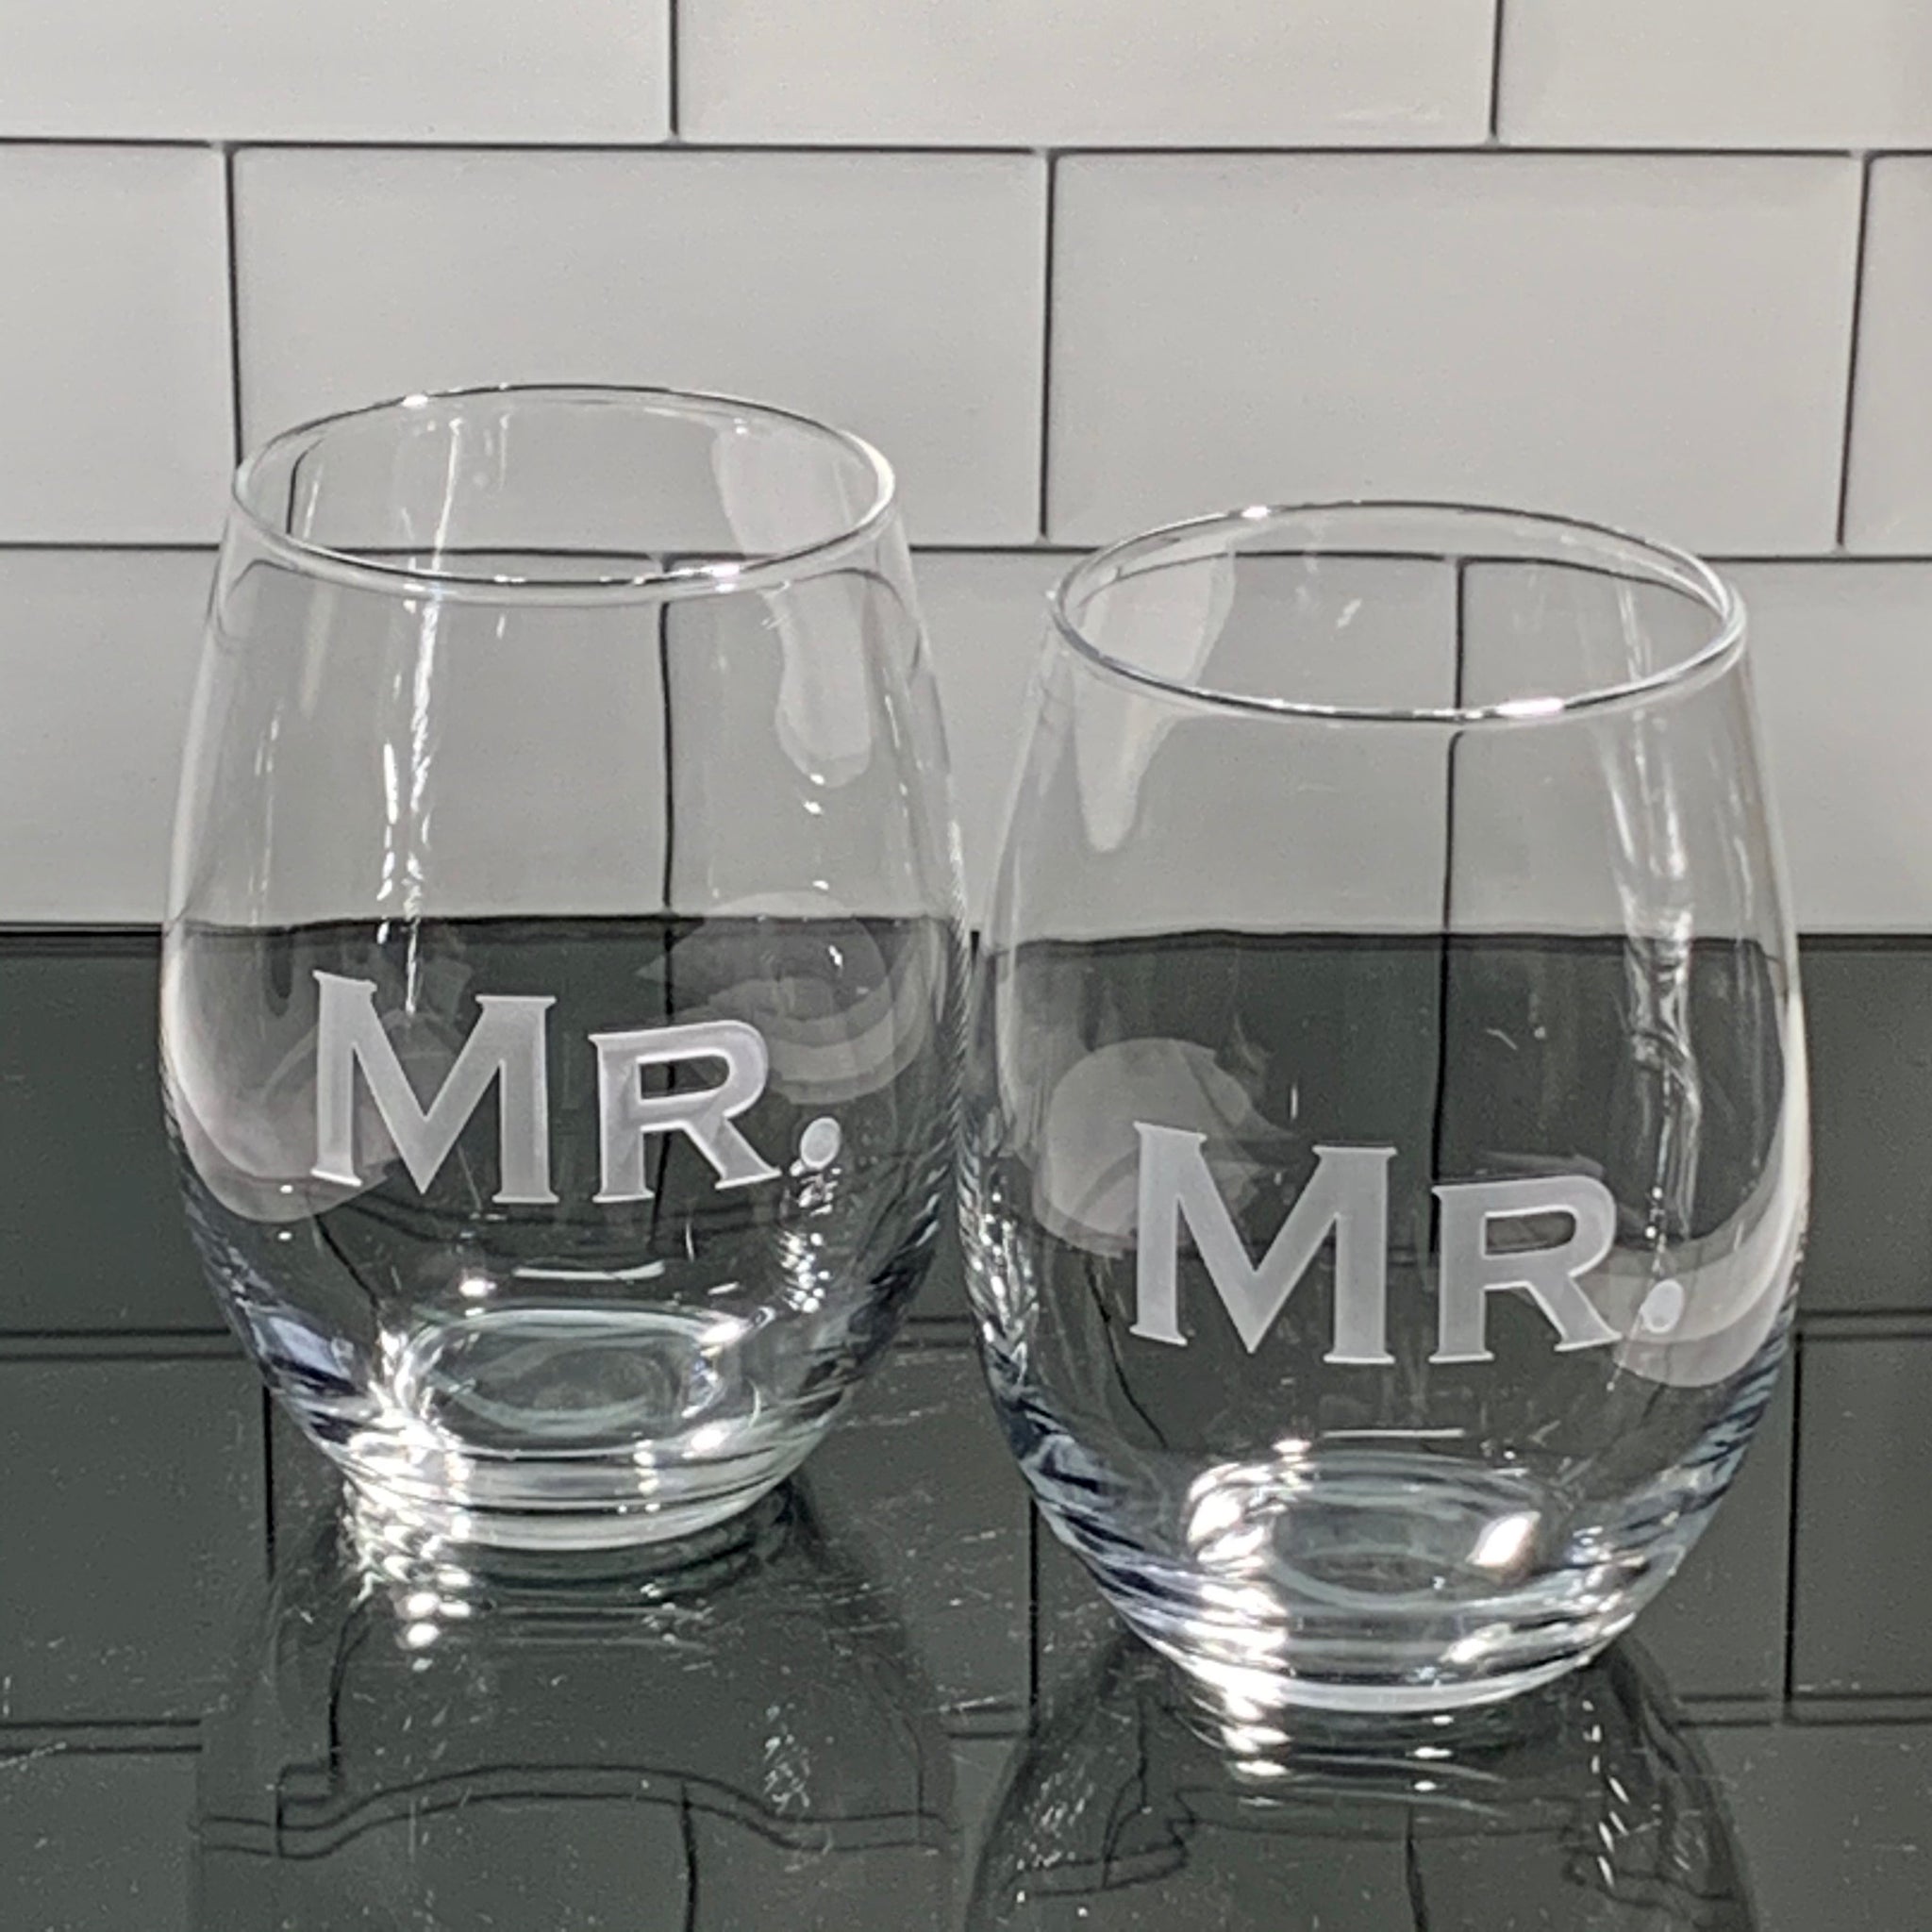 Masters 19 oz. Stemless Etched Wine Glass - Set of Two